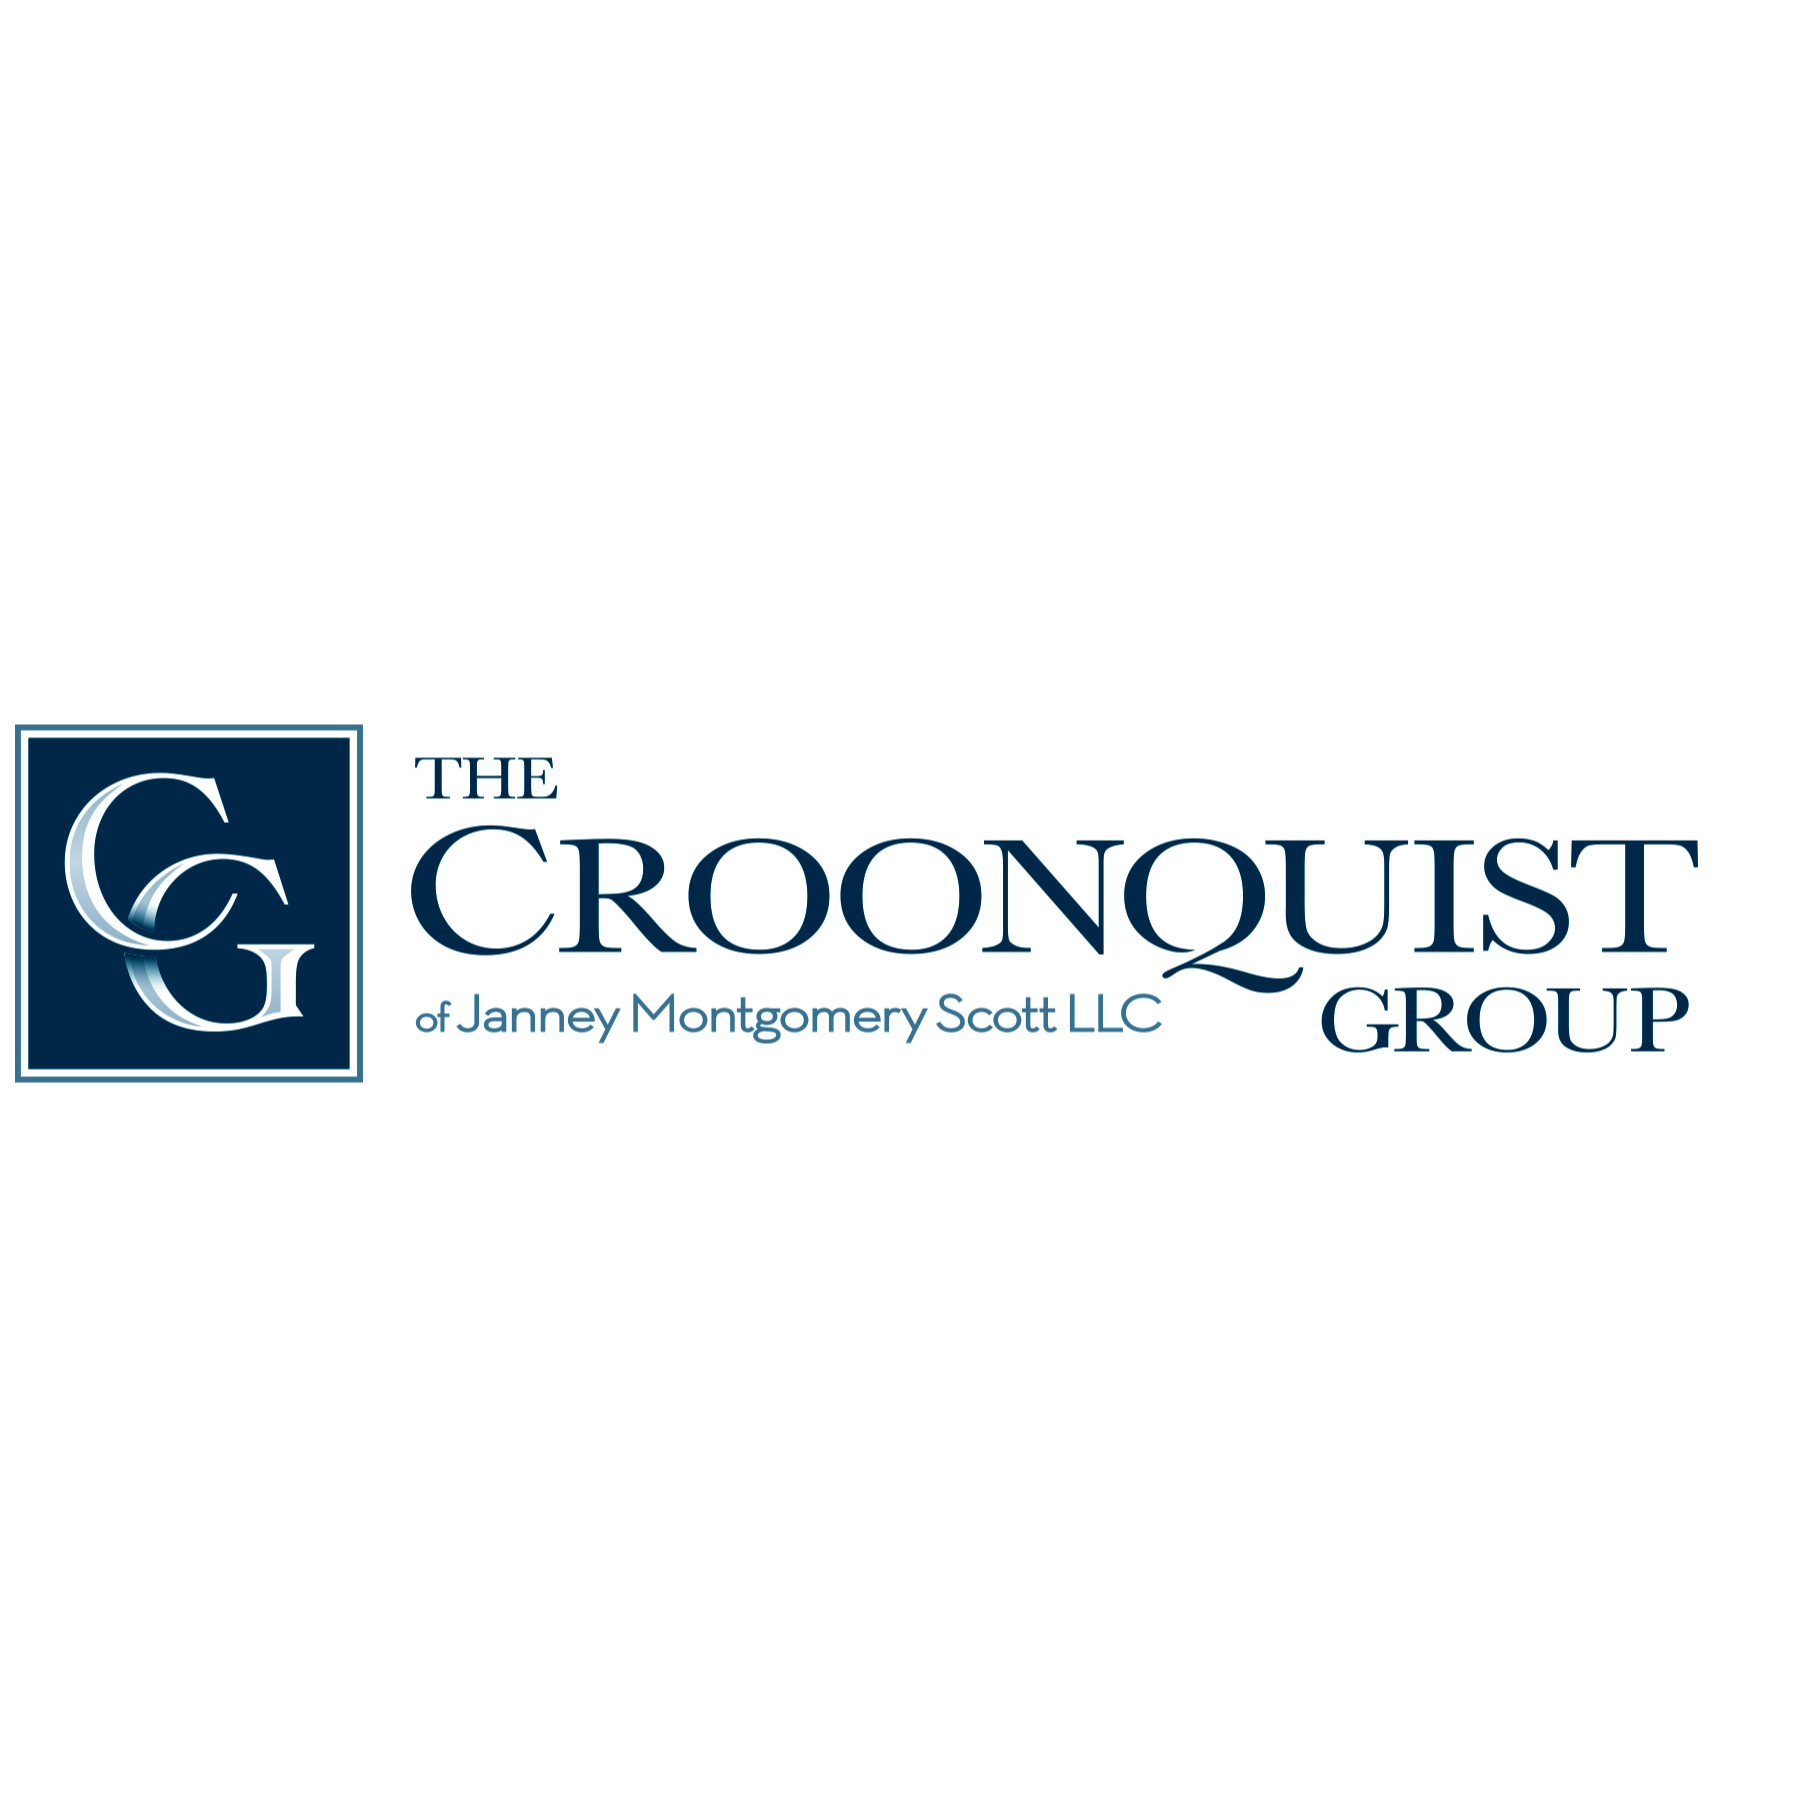 The Croonquist Group of Janney Montgomery Scott